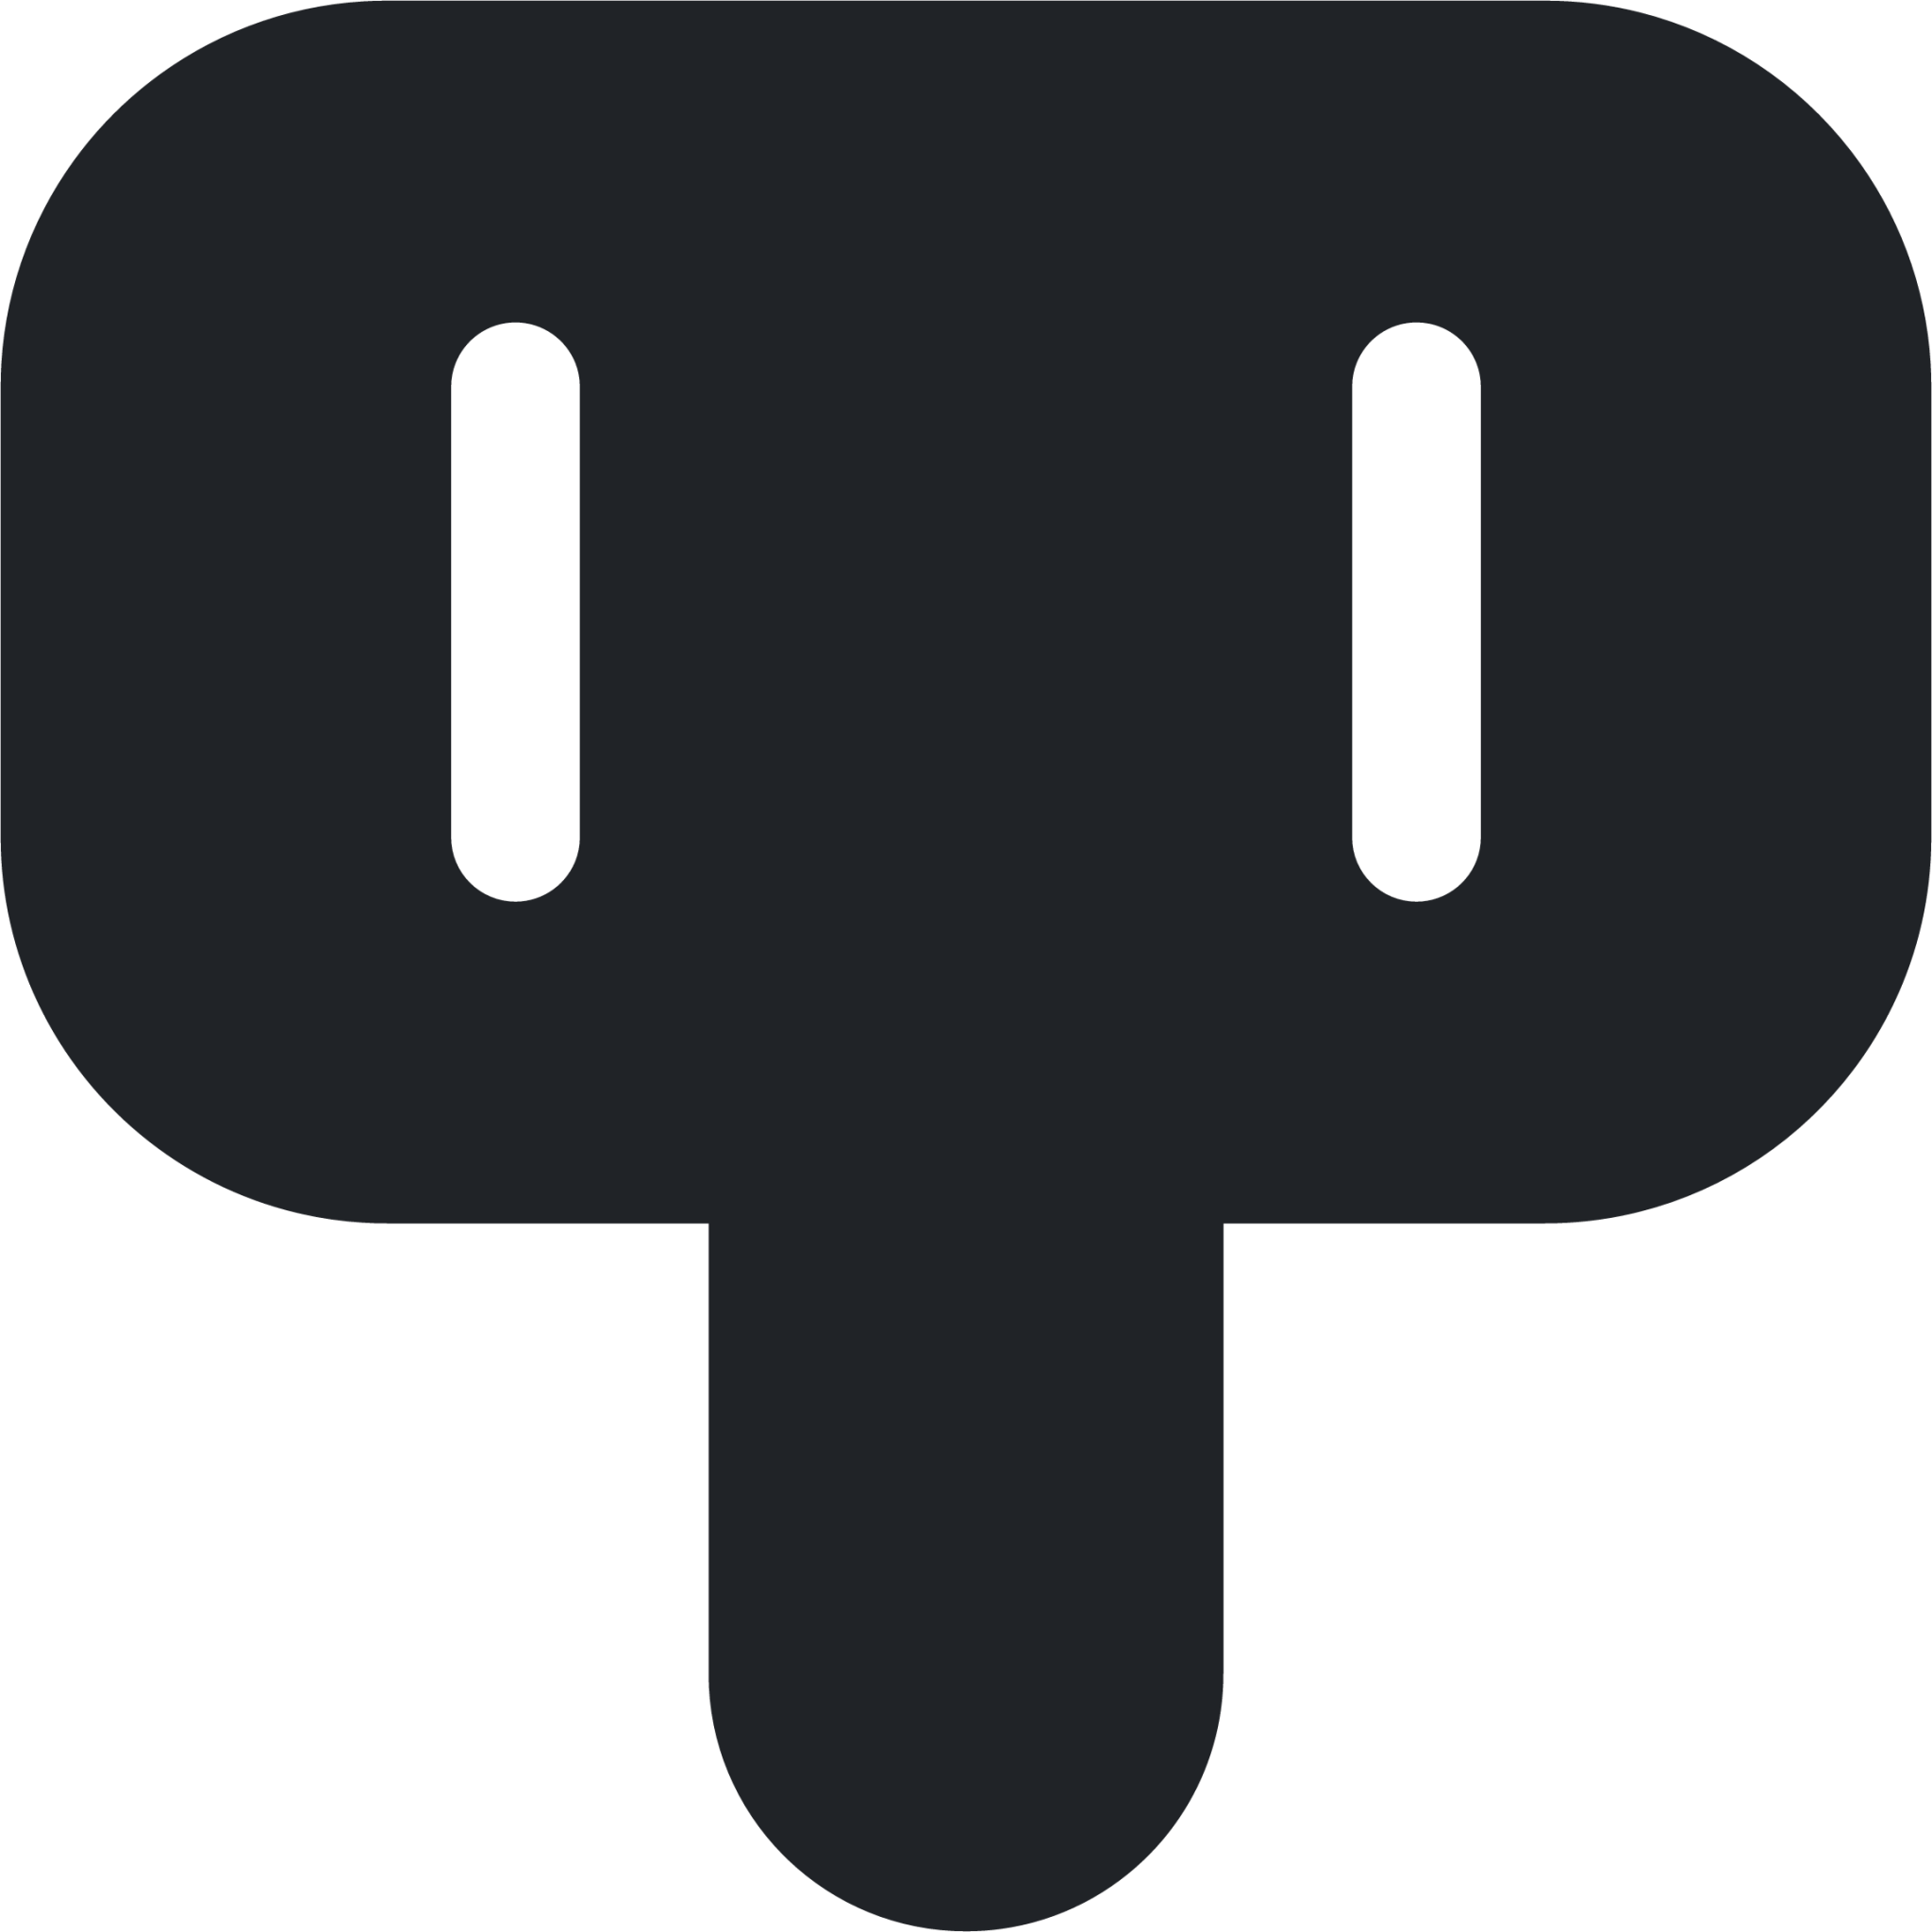 hammer (rounded filled) icon